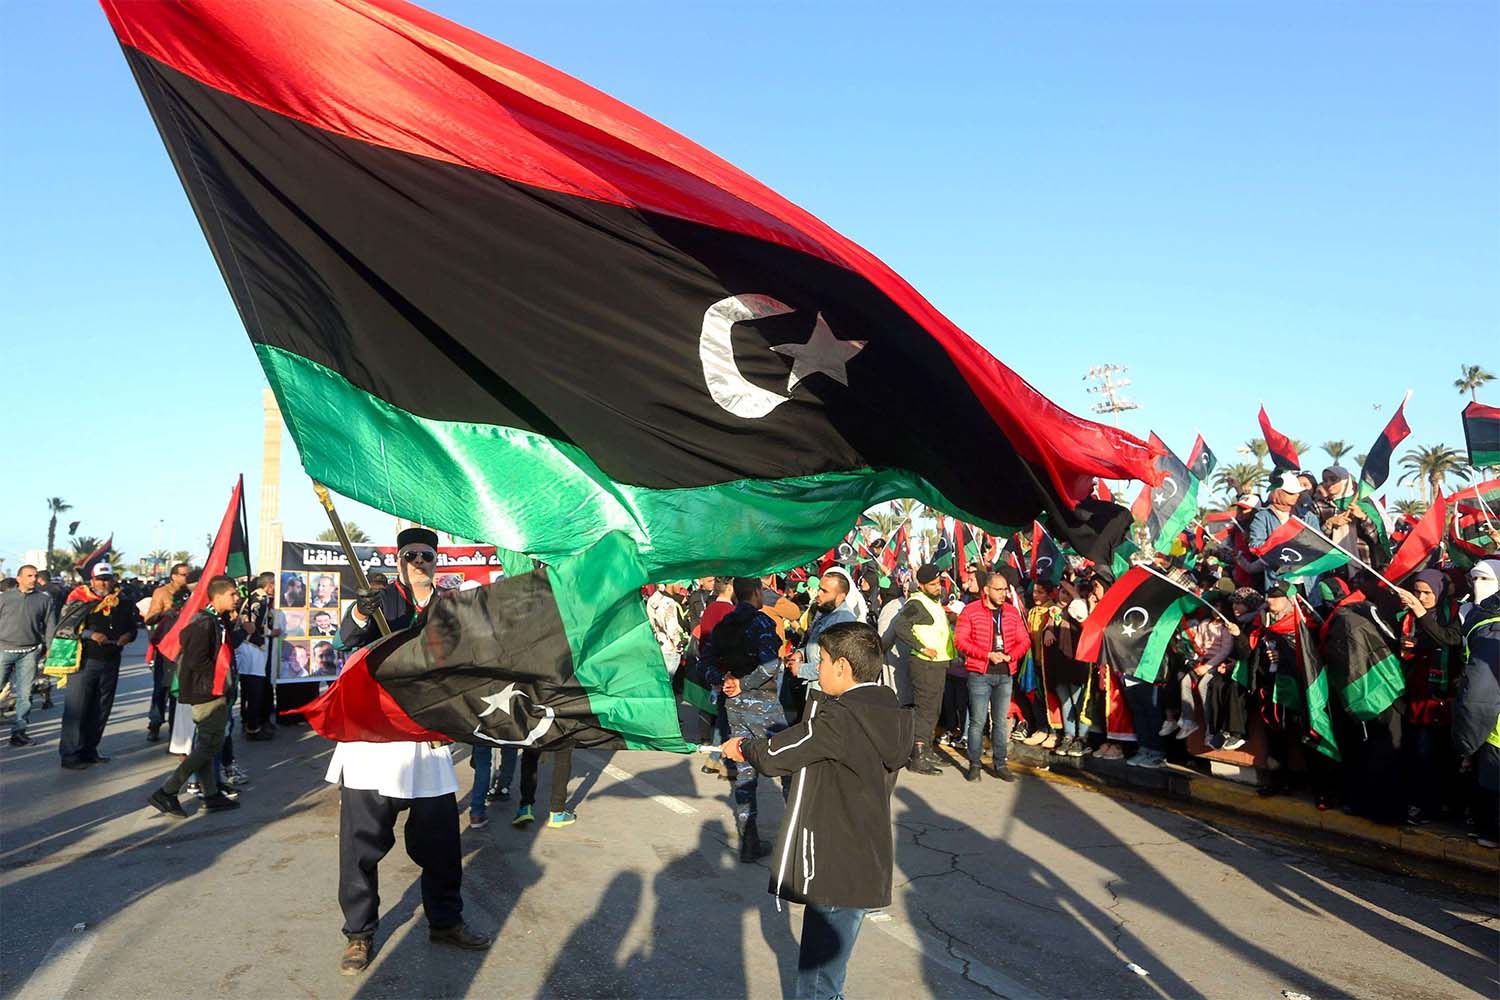 Libya has been divided since 2014 between rival administrations 